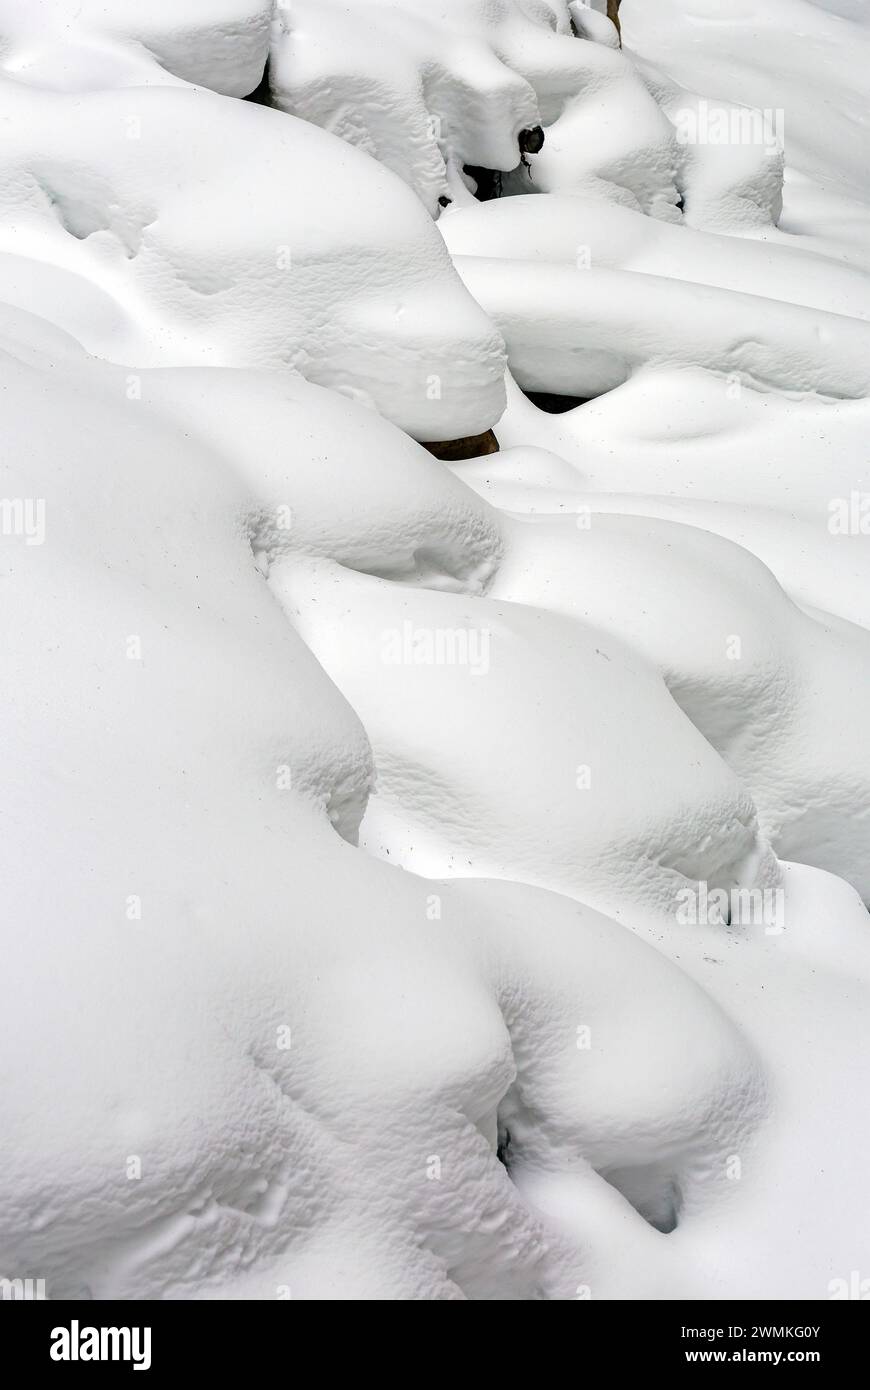 Close-up of snow covered rocks creating a contoured snow scene along a cliff; Lake Louise, Alberta, Canada Stock Photo